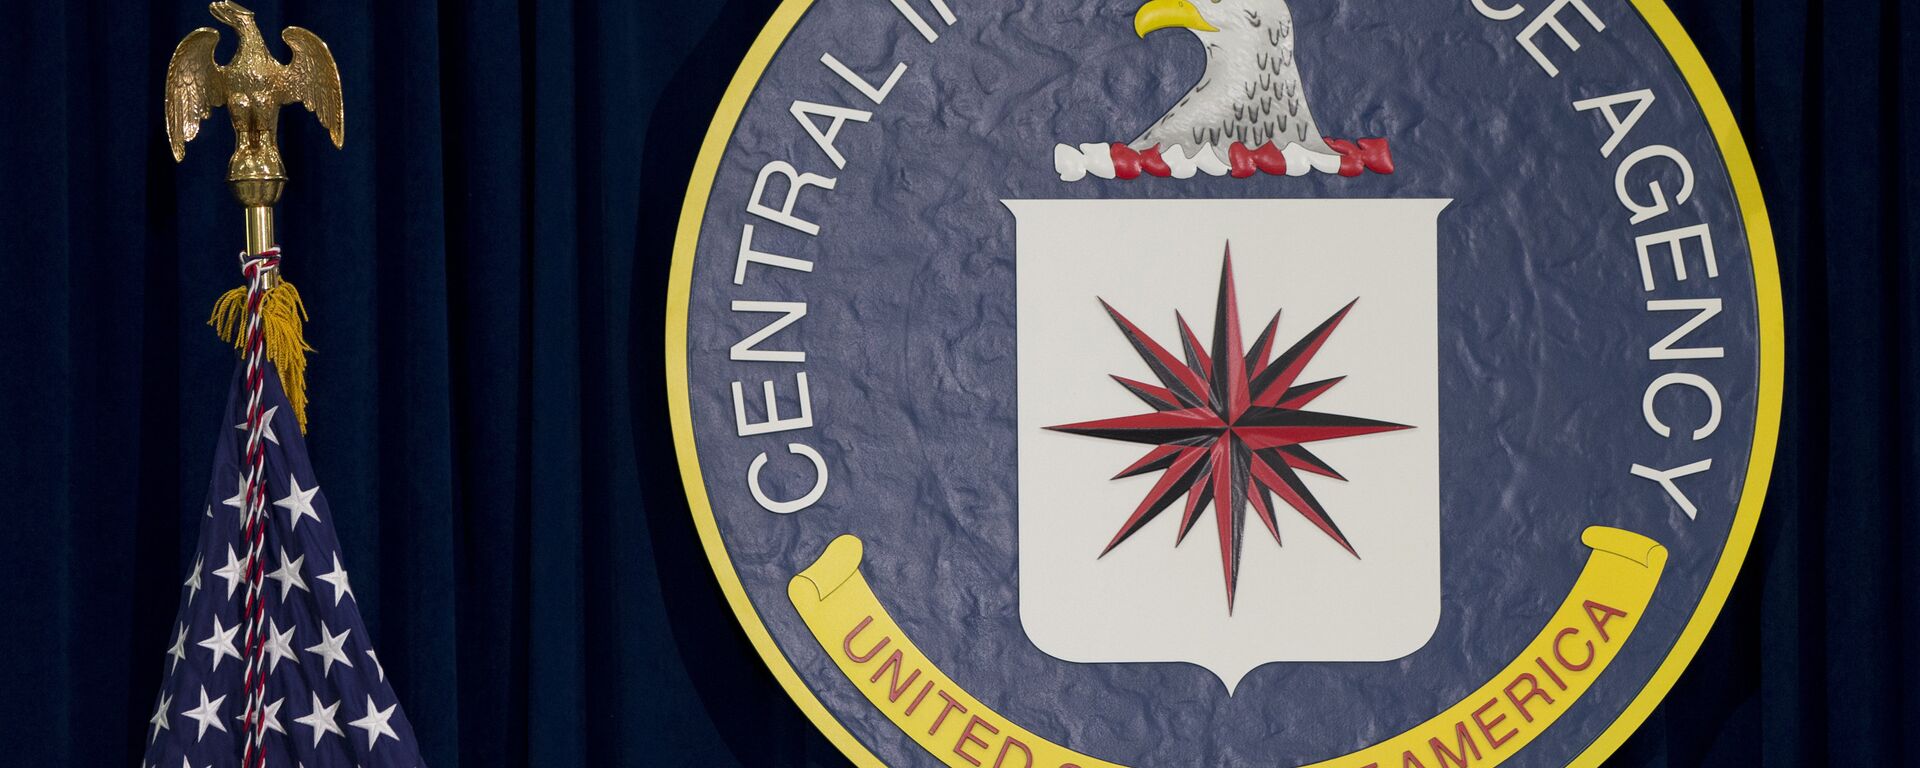 This April 13, 2016 file photo shows the seal of the Central Intelligence Agency at CIA headquarters in Langley, Virginia. - Sputnik International, 1920, 20.02.2018